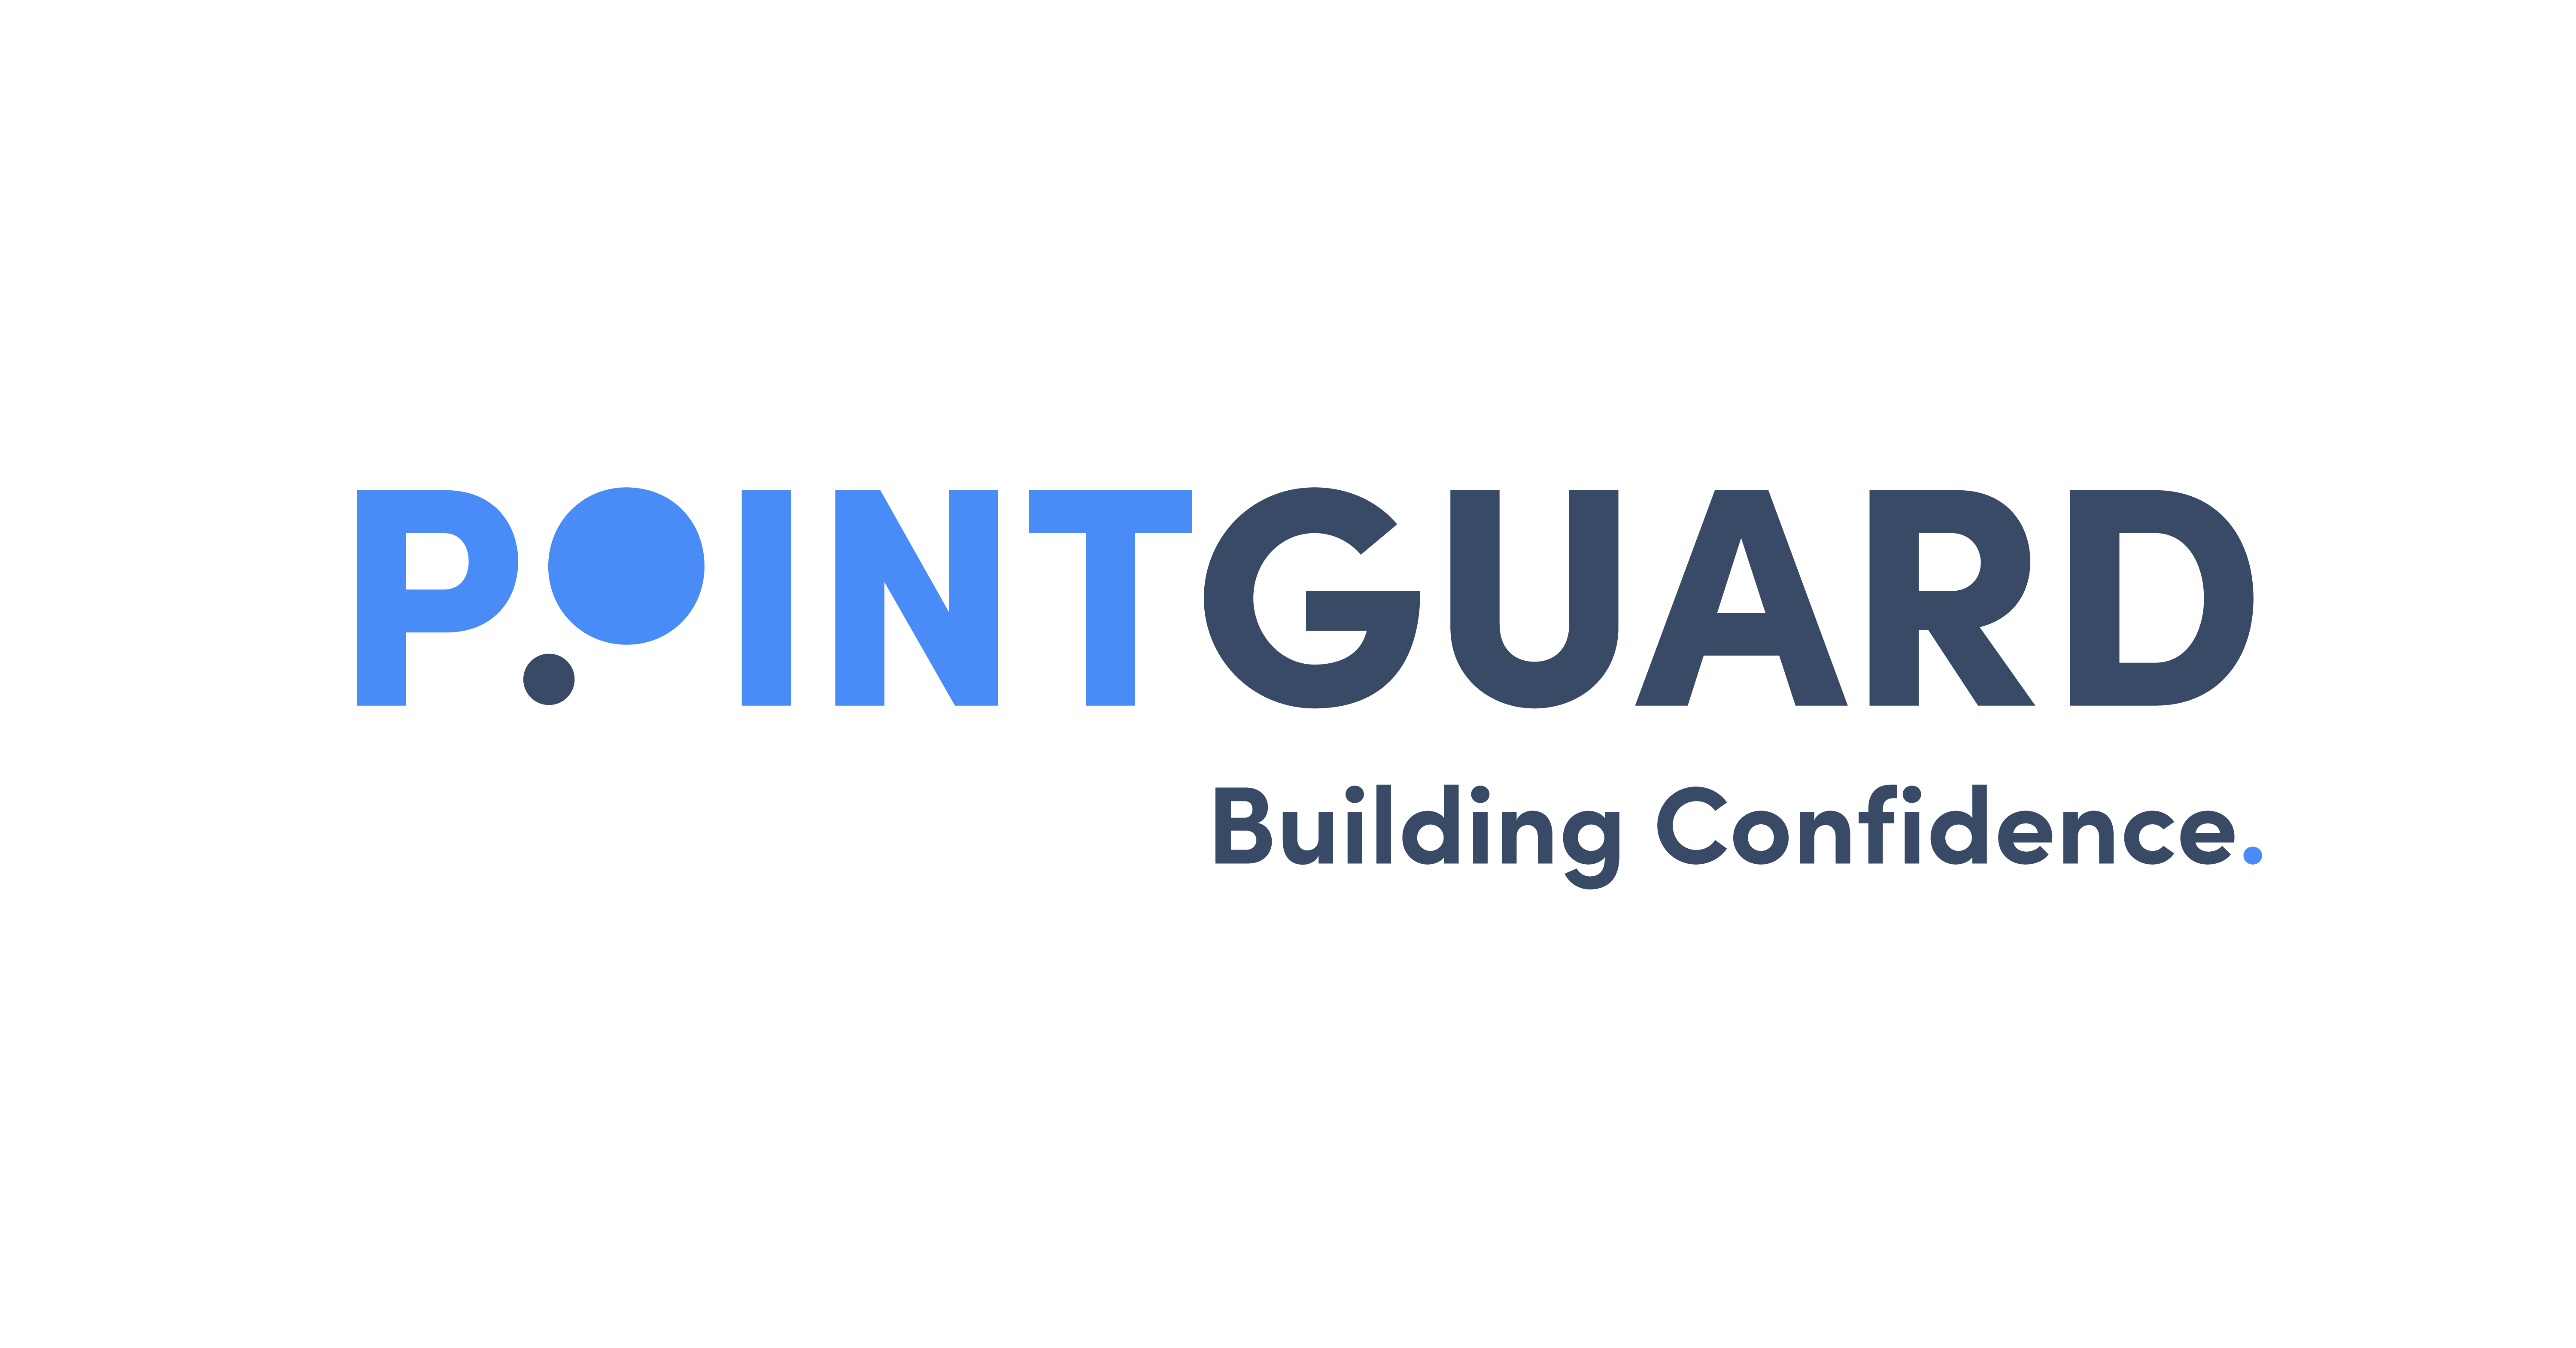 PointGuard Announces FM Software Enhancements for Buildings’ Efficiency, Operation and Remote Access